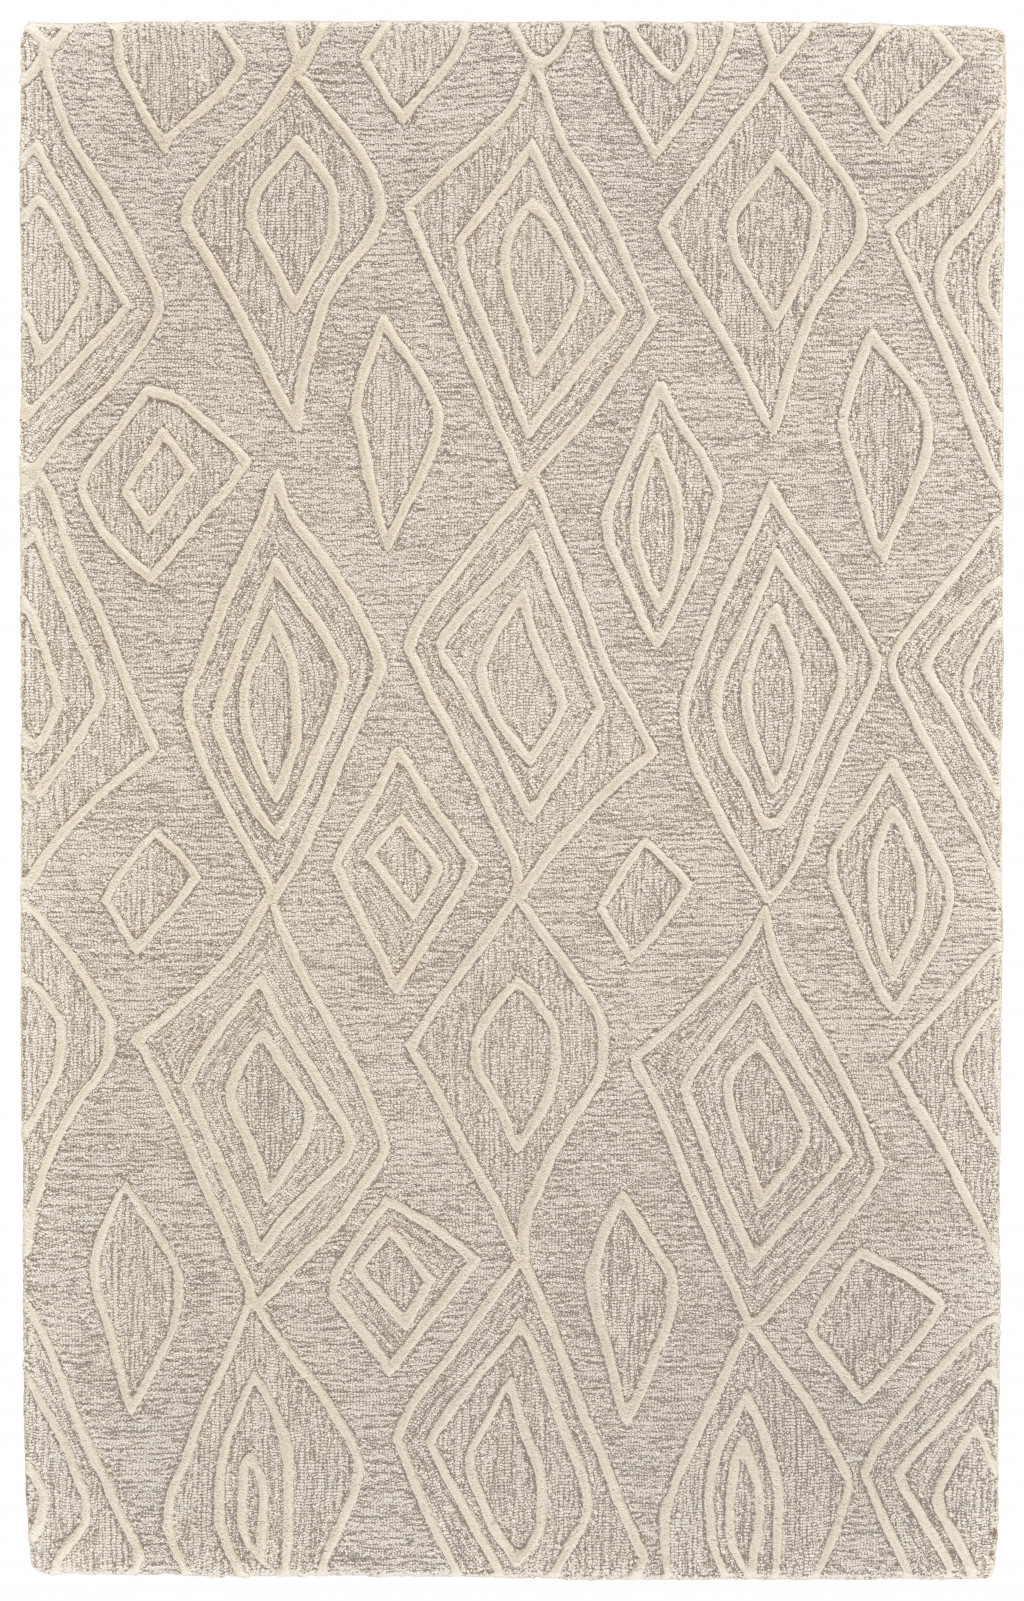 10' X 13' Tan And Ivory Wool Geometric Tufted Handmade Stain Resistant Area Rug-511871-1